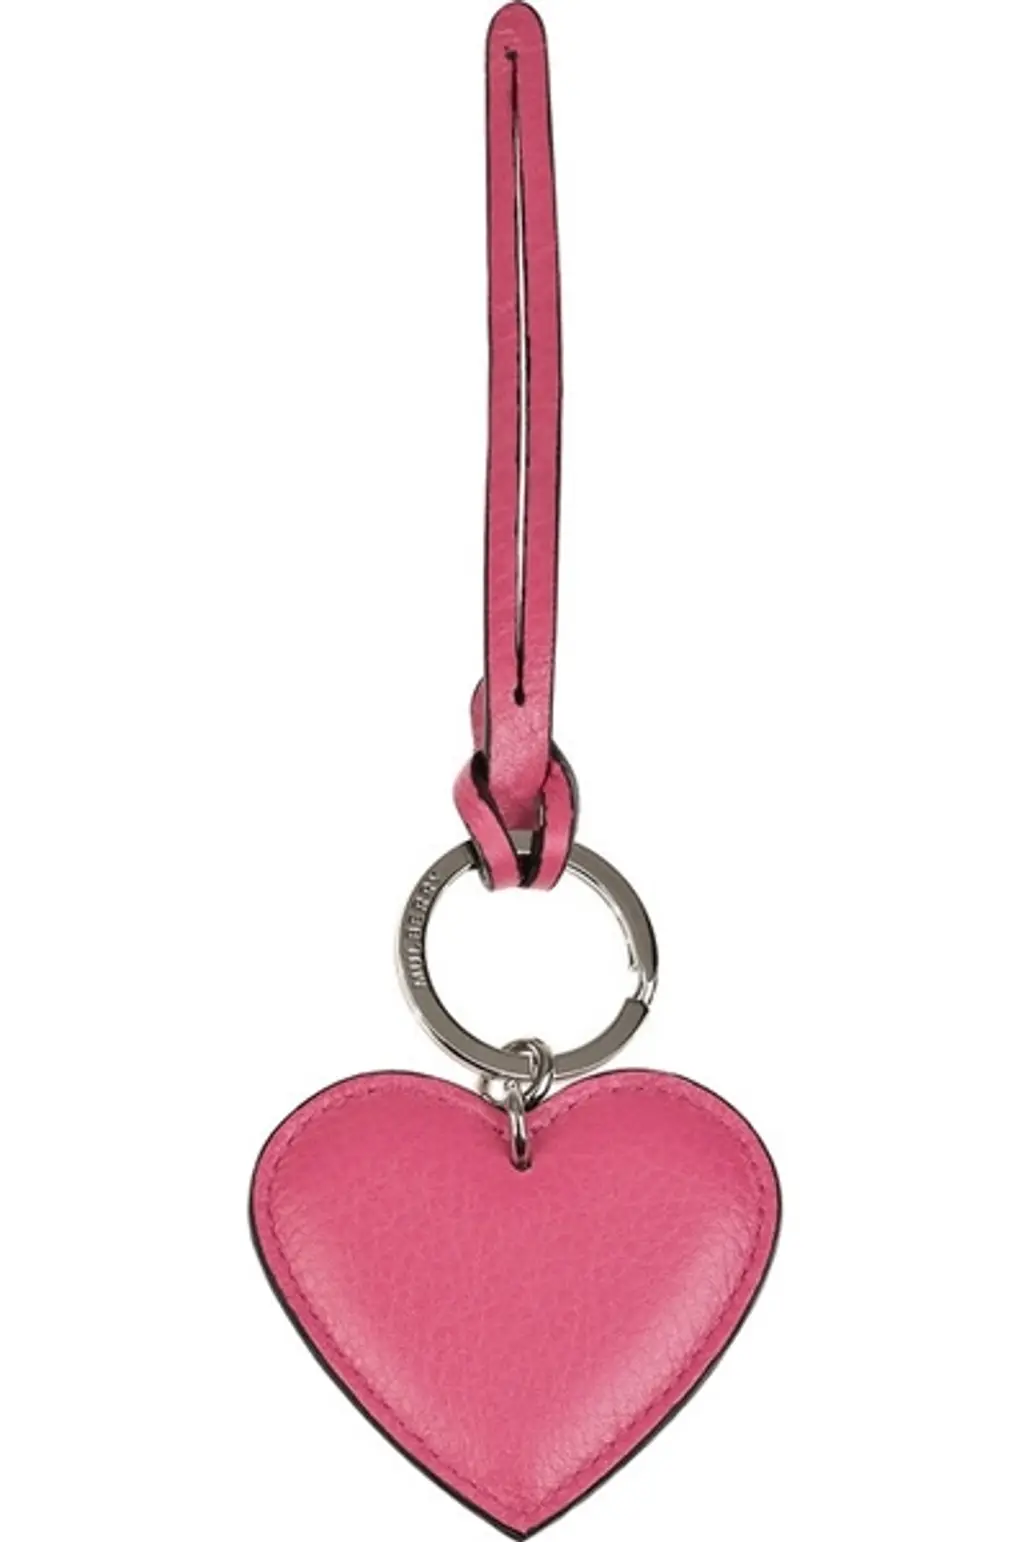 Mulberry Leather Heart Key Fob